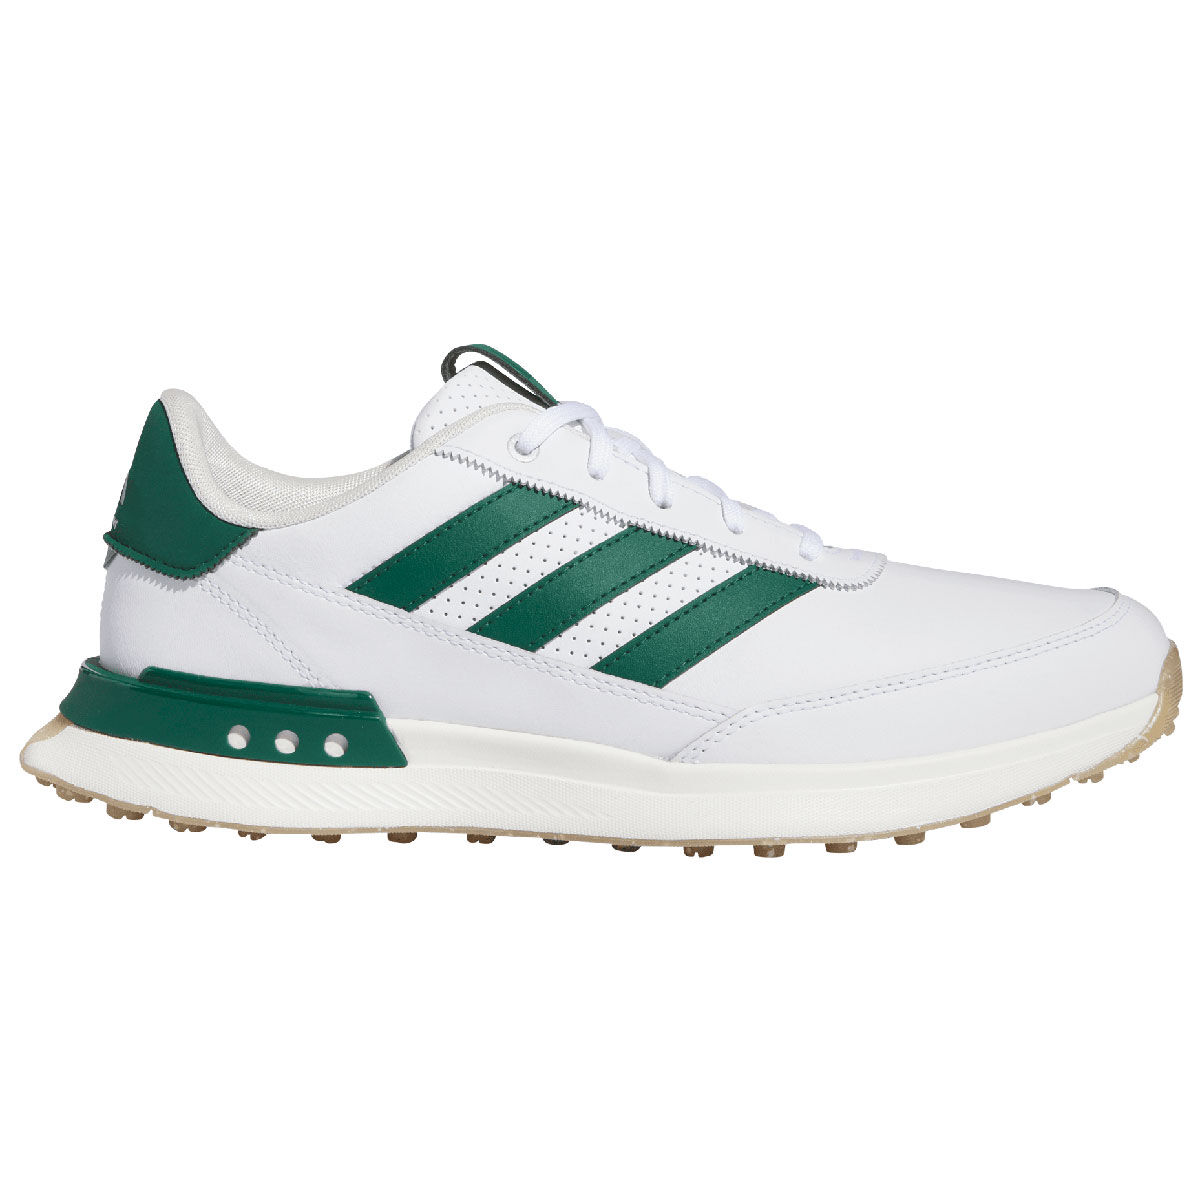 adidas S2G Leather 24 Waterproof Spikeless Golf Shoes, Mens, White/collegiate green/gum4, 8 | American Golf